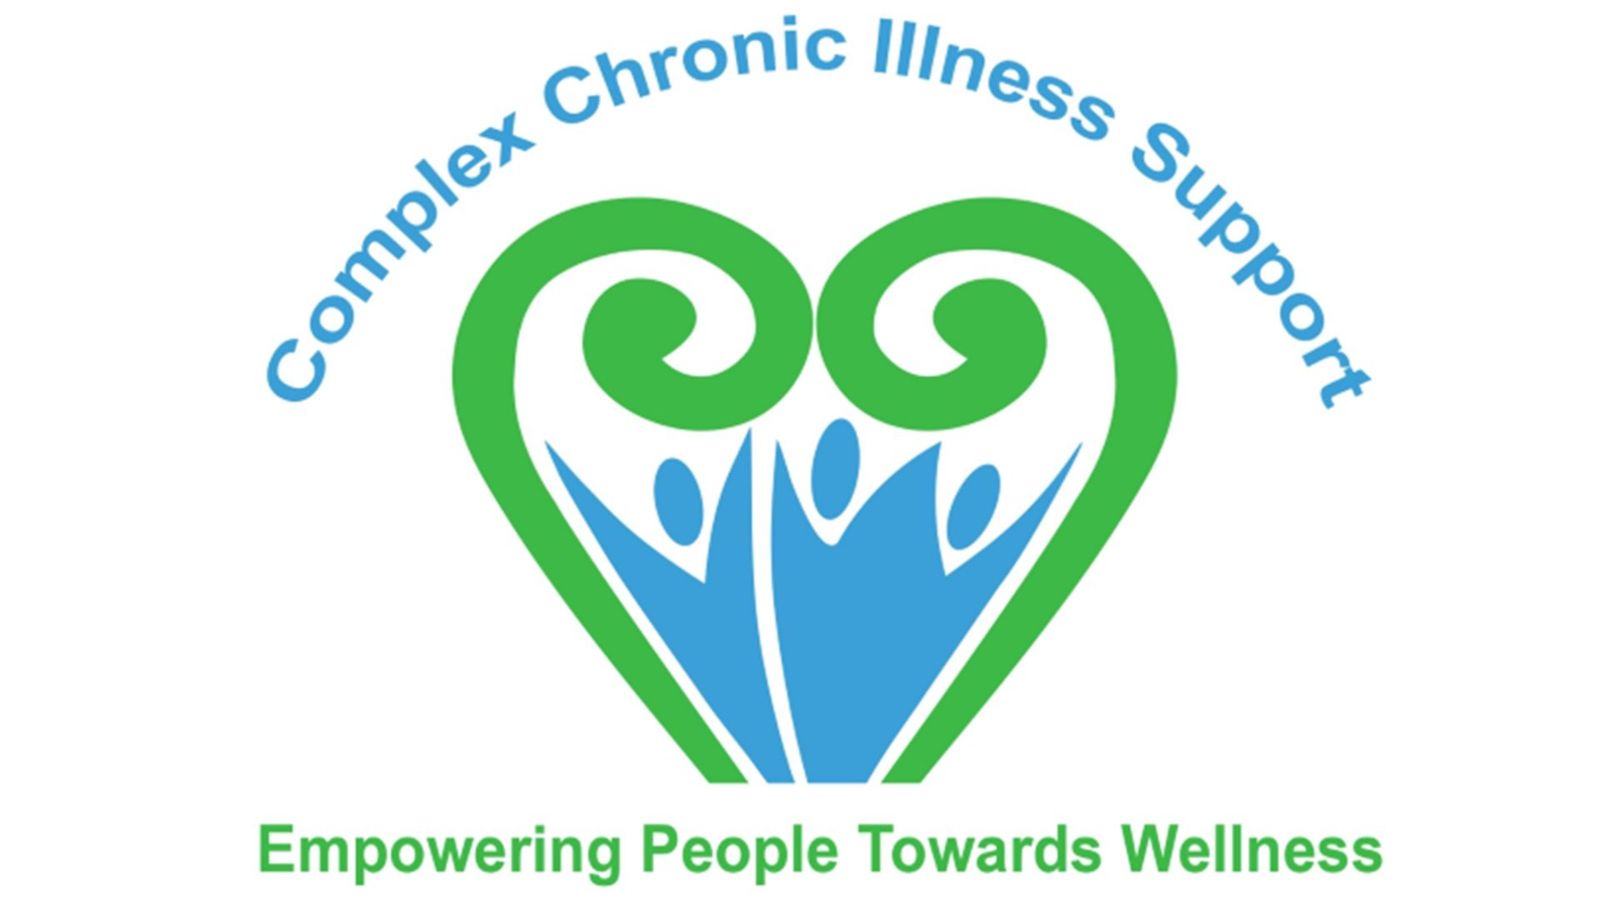 A green heart filled with three blue-outlined people. Above the heart, there is writing in blue stating “Complex Chronic Illness Support”; below the heart, there is writing in green stating “Empowering people towards wellness”.